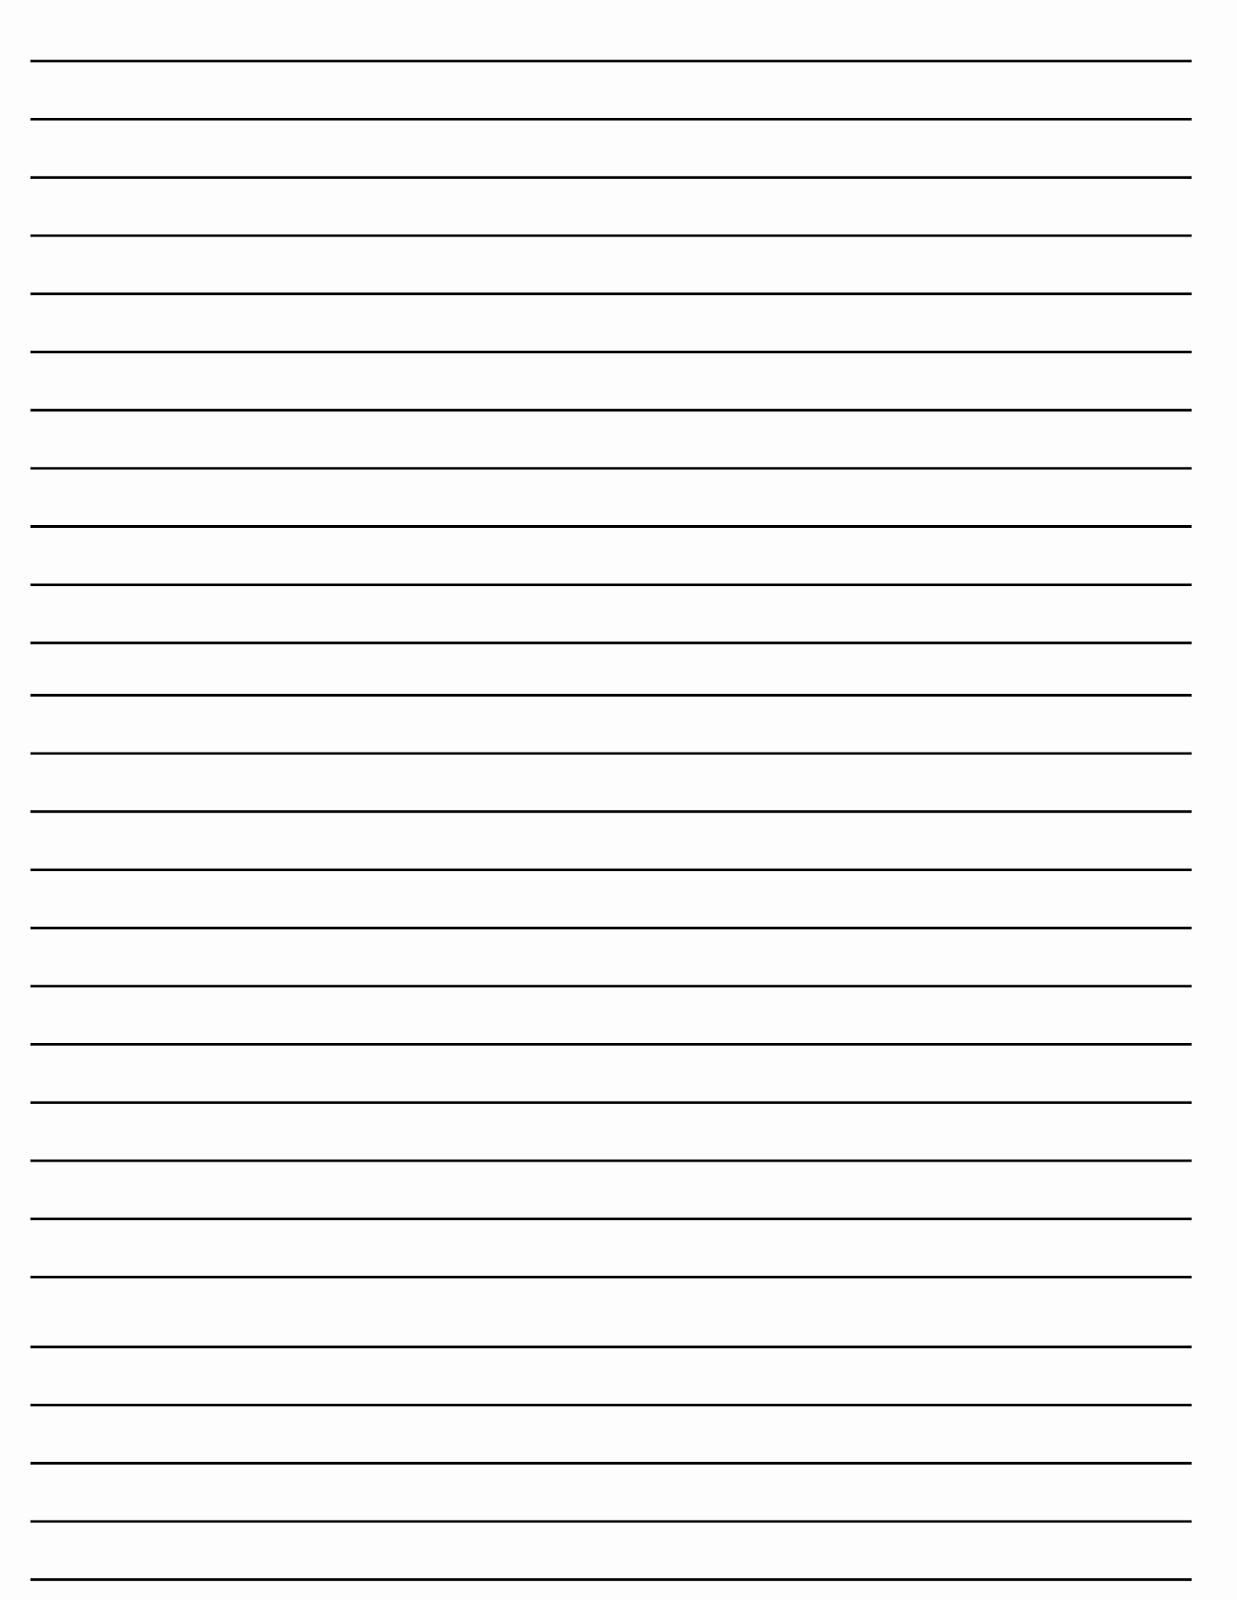 Printable Lined Writing Paper Beautiful Index Of Postpic 2014 09